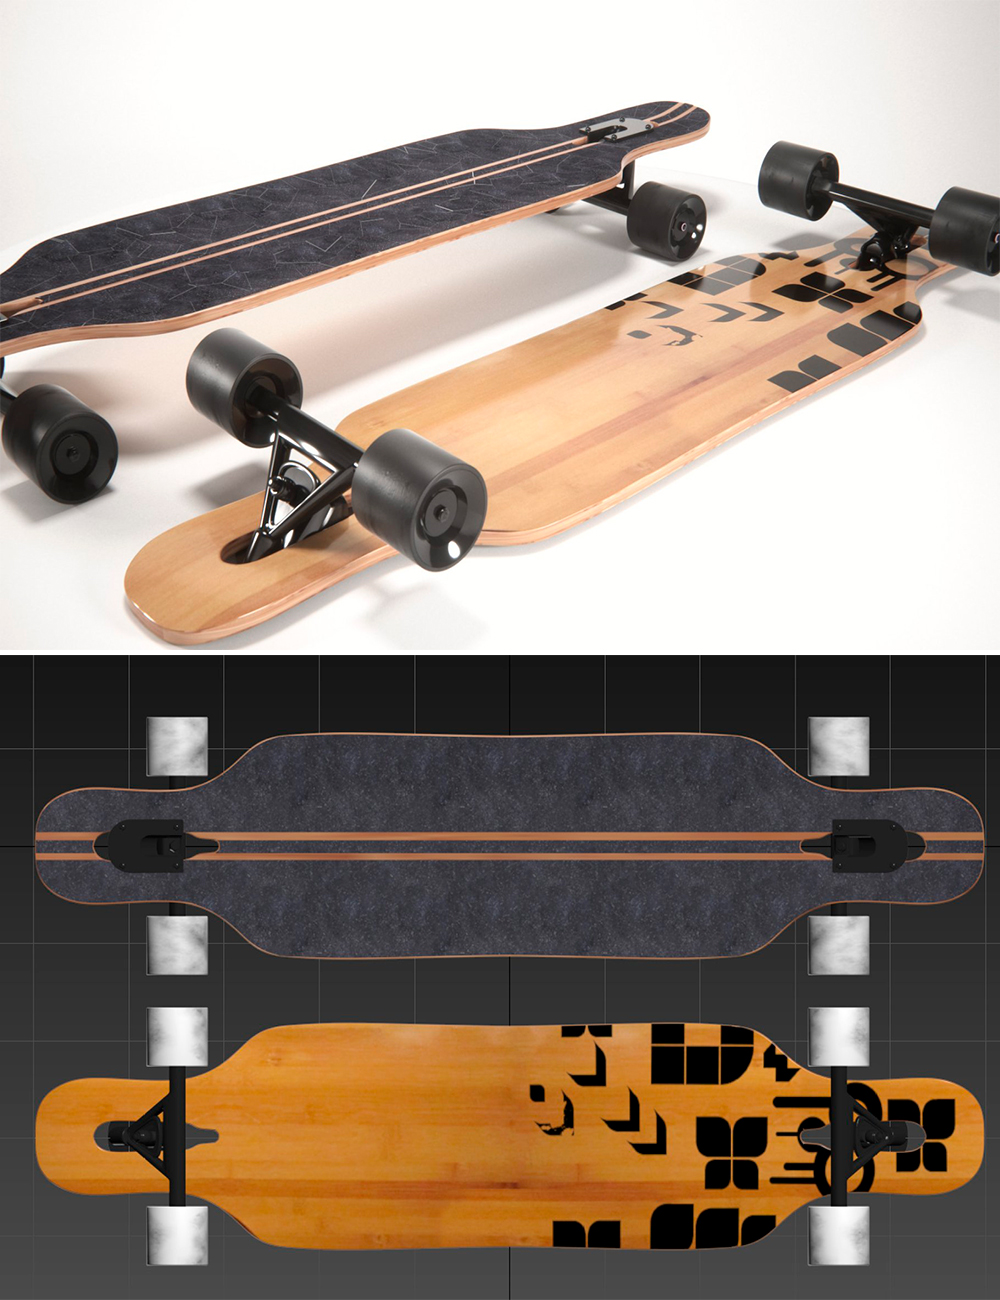 Rendering of an adorable 3d model of a longboard